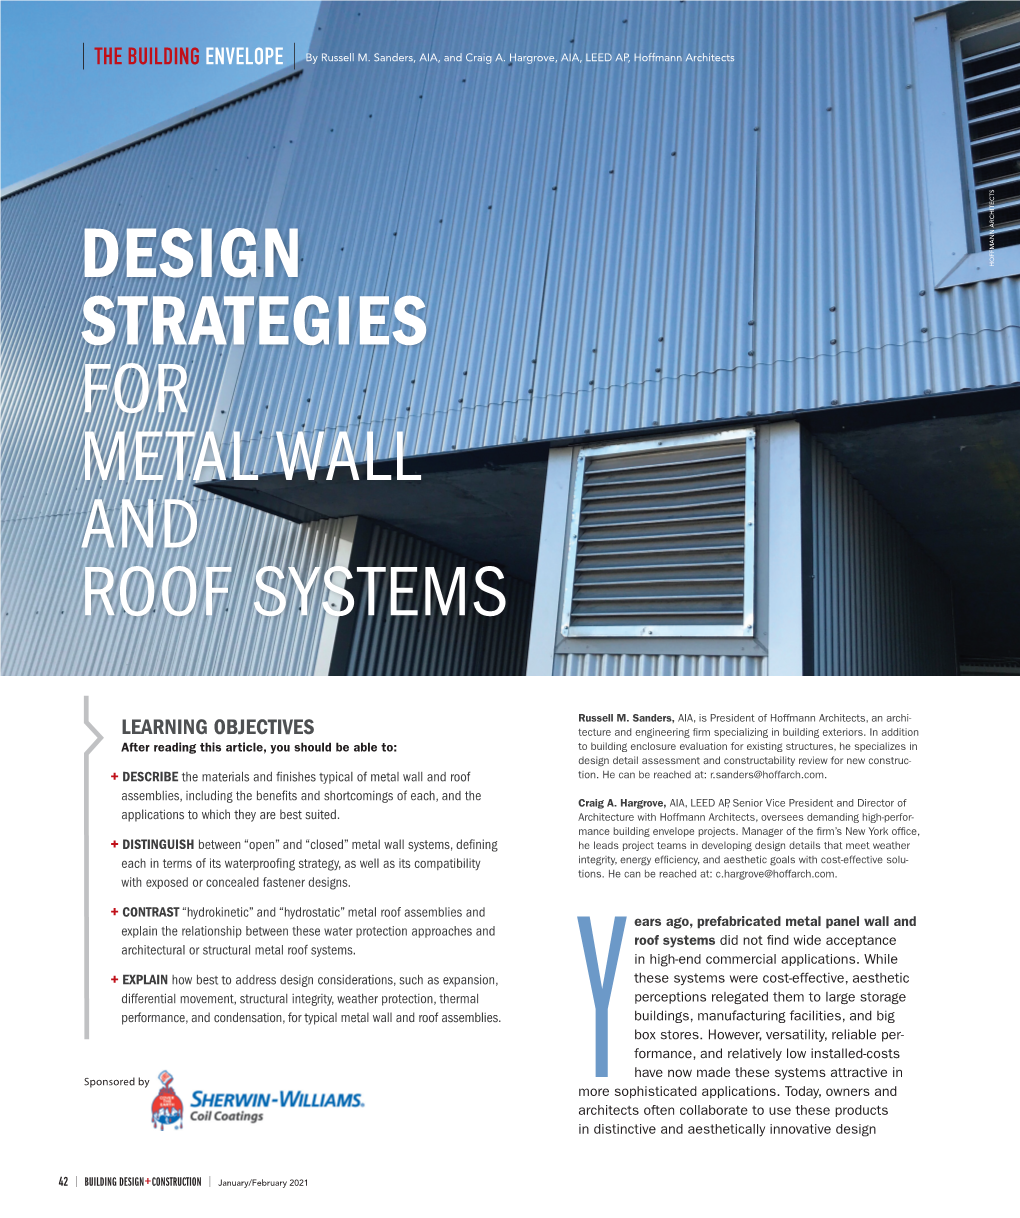 Design Strategies for Metal Wall and Roof Systems